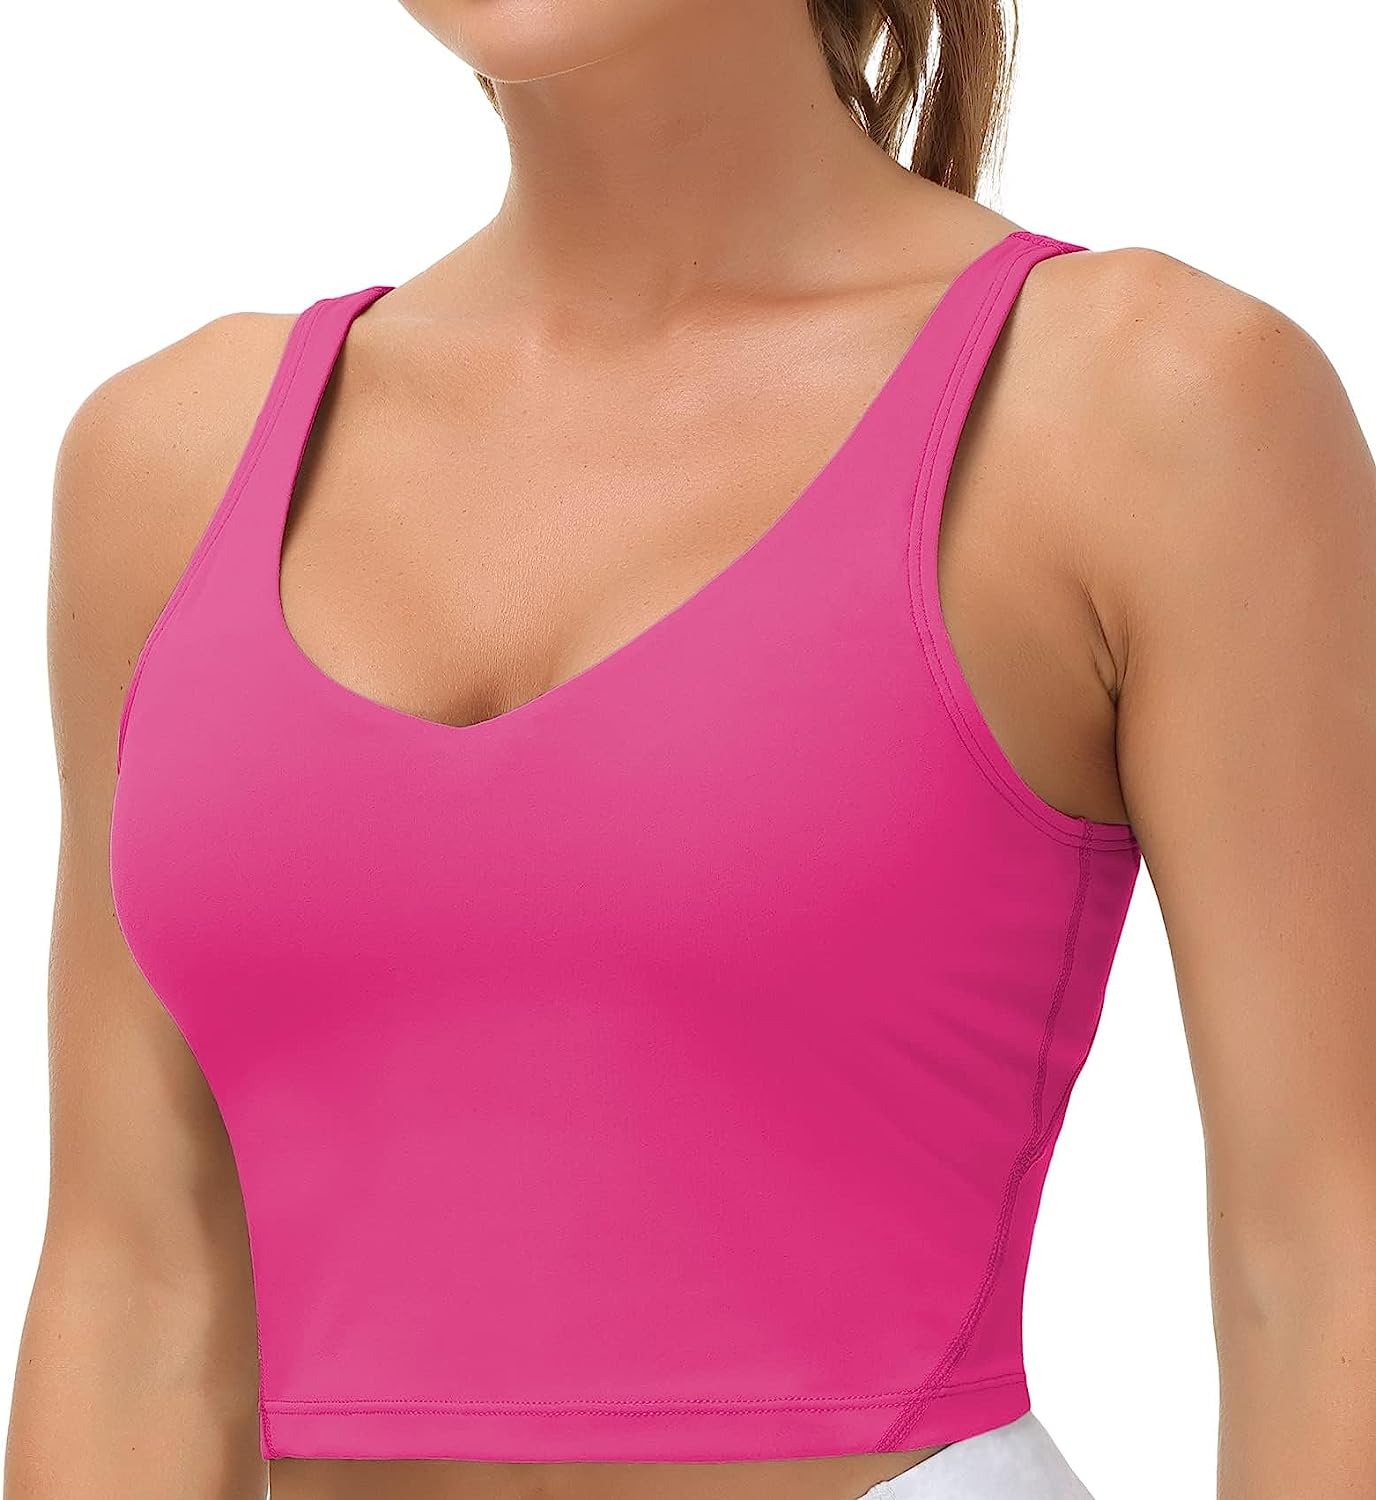 THE GYM PEOPLE Womens' Sports Bra Longline Wirefree Padded